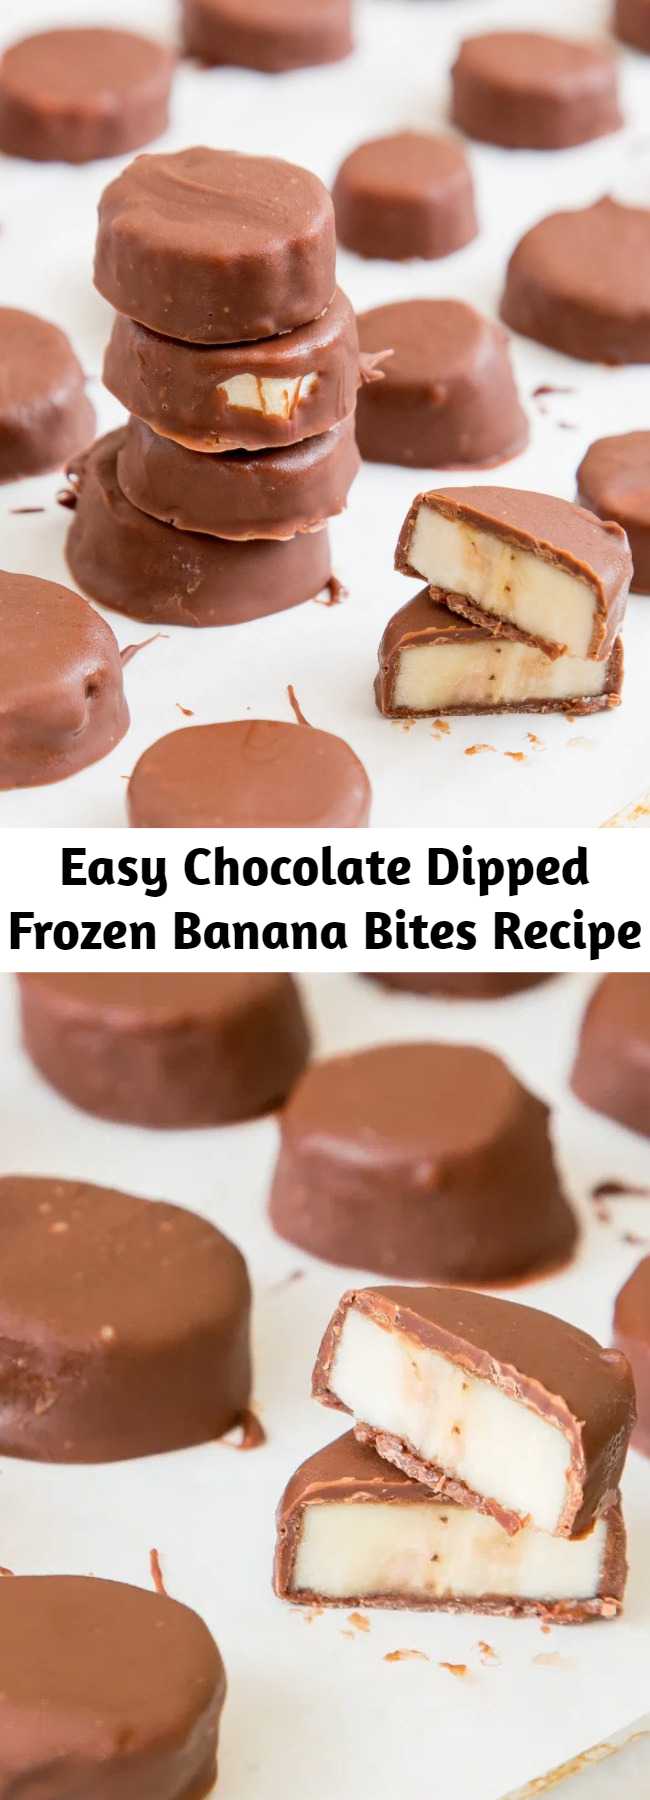 Easy Chocolate Dipped Frozen Banana Bites Recipe - These Chocolate Dipped Frozen Banana Bites are perfect little snacks with just 3 ingredients! So easy and tasty!